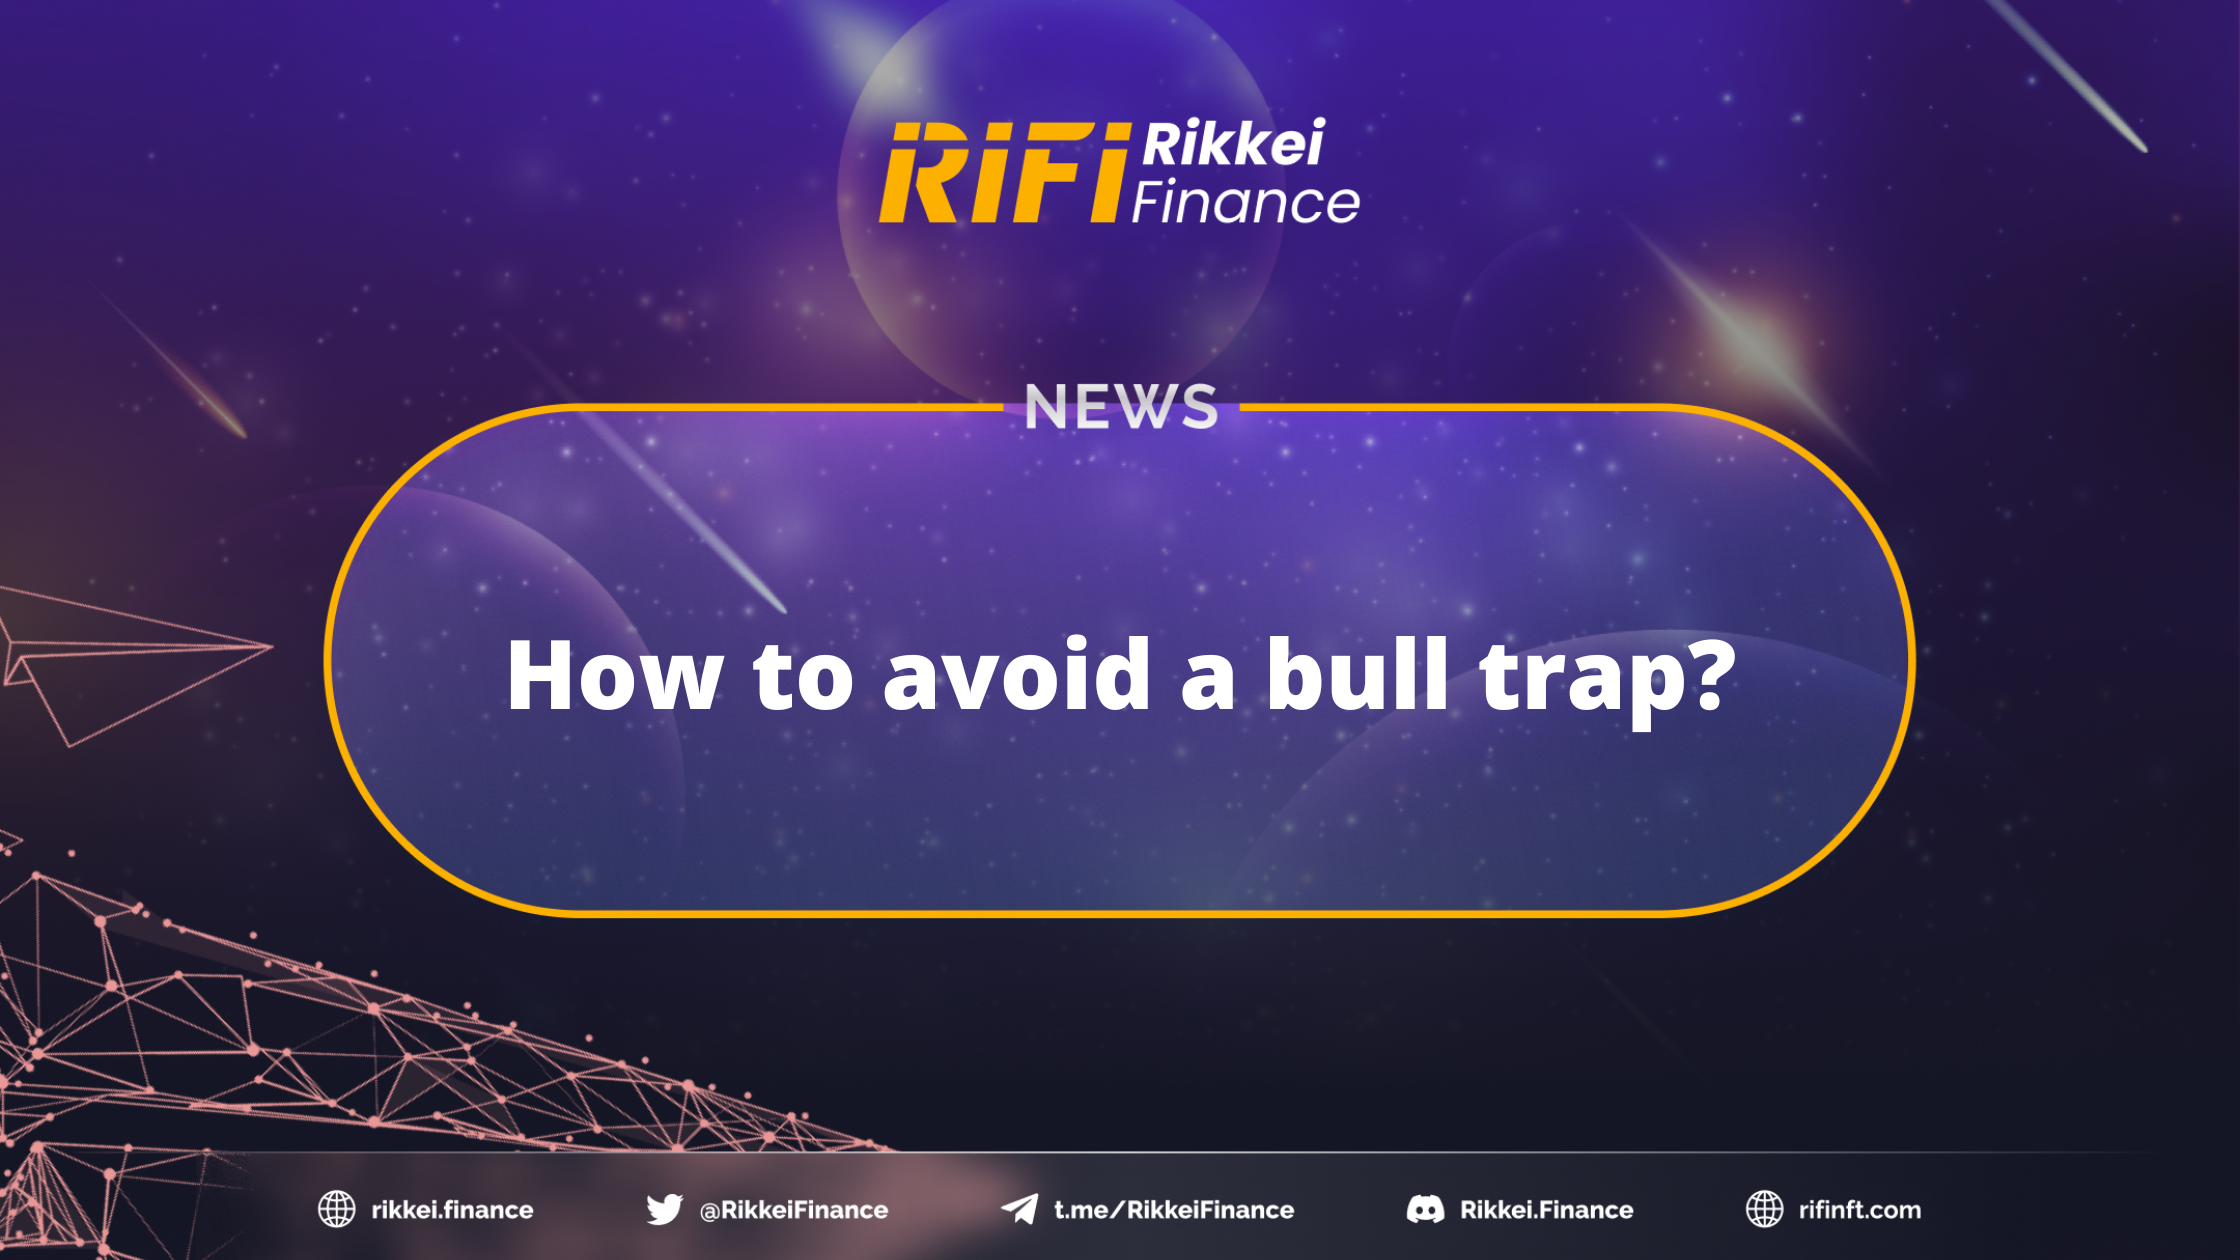 How to avoid a bull trap?